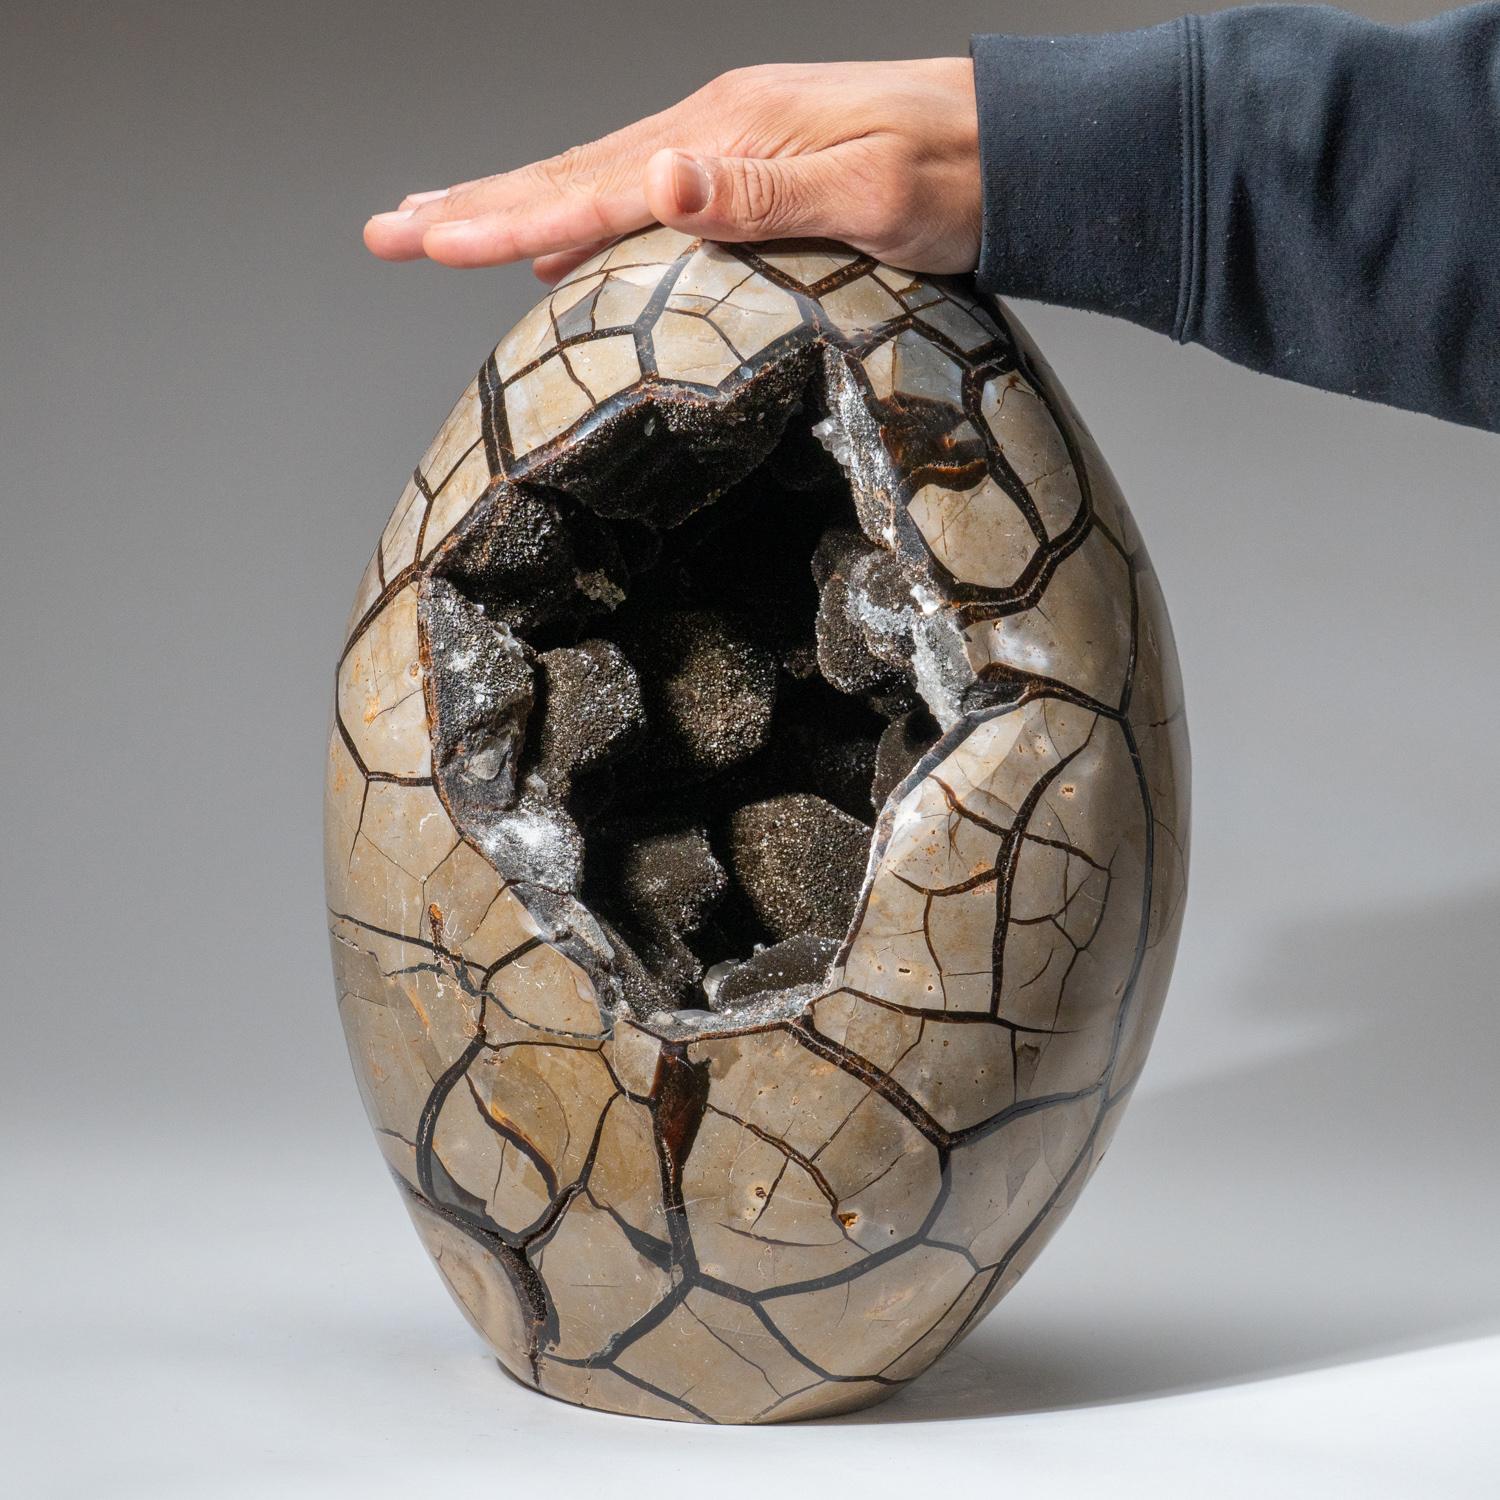 Contemporary Polished Septarian Druzy Geode Egg from Madagascar (44.5 lbs) For Sale